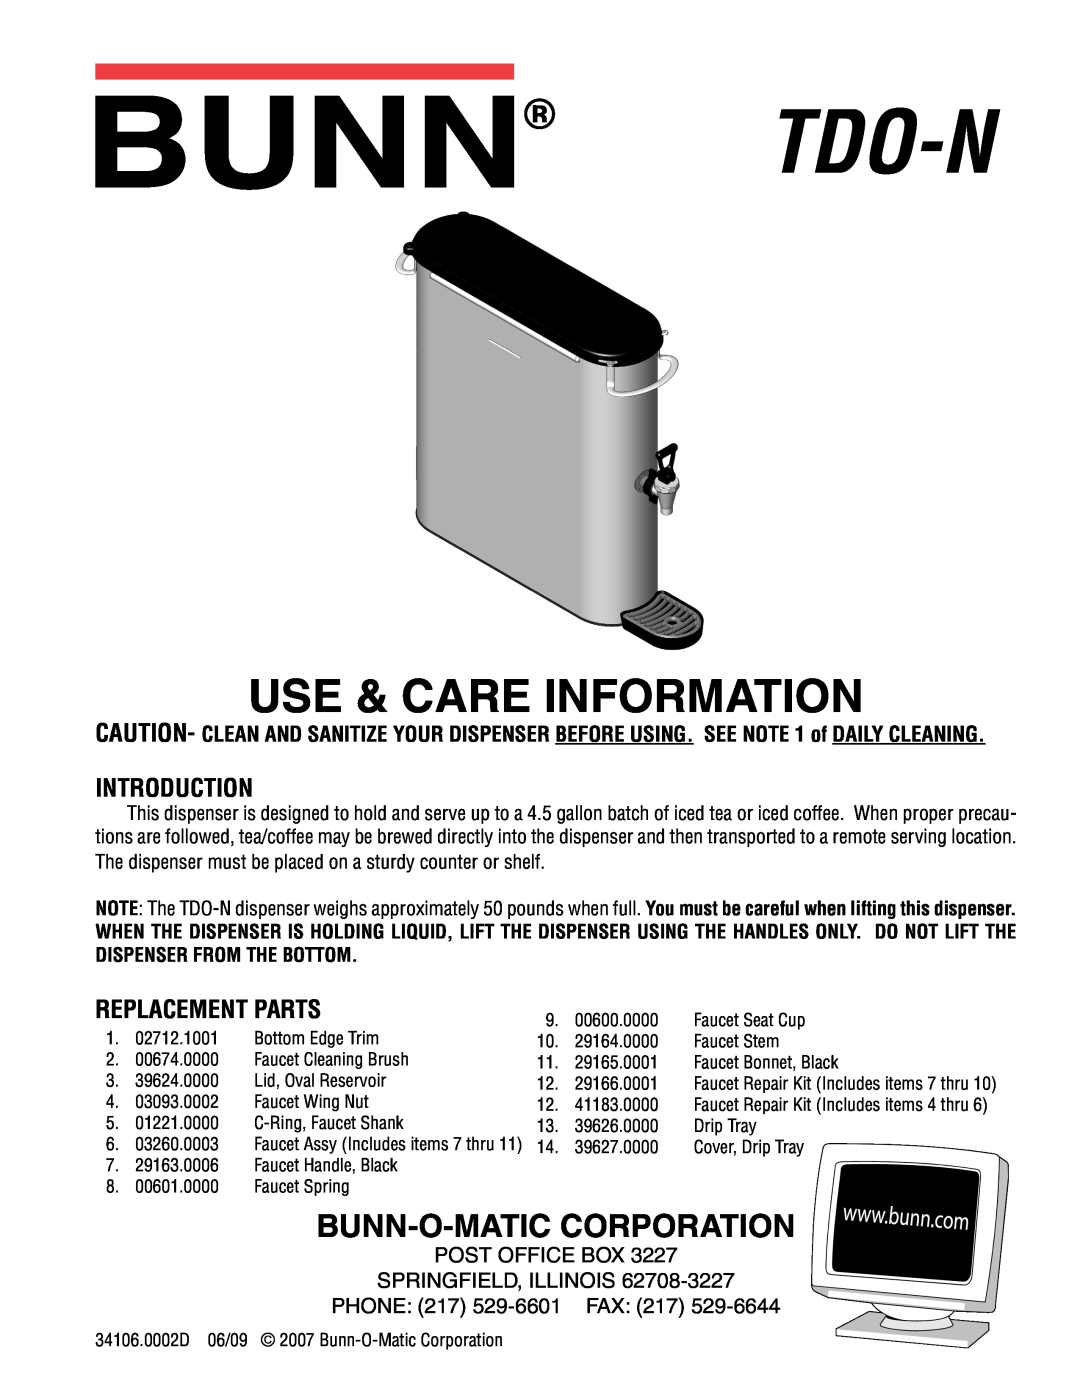 Bunn TDO-N manual Introduction, Replacement Parts, Tdo-N, Use & Care Information, Bunn-O-Maticcorporation 